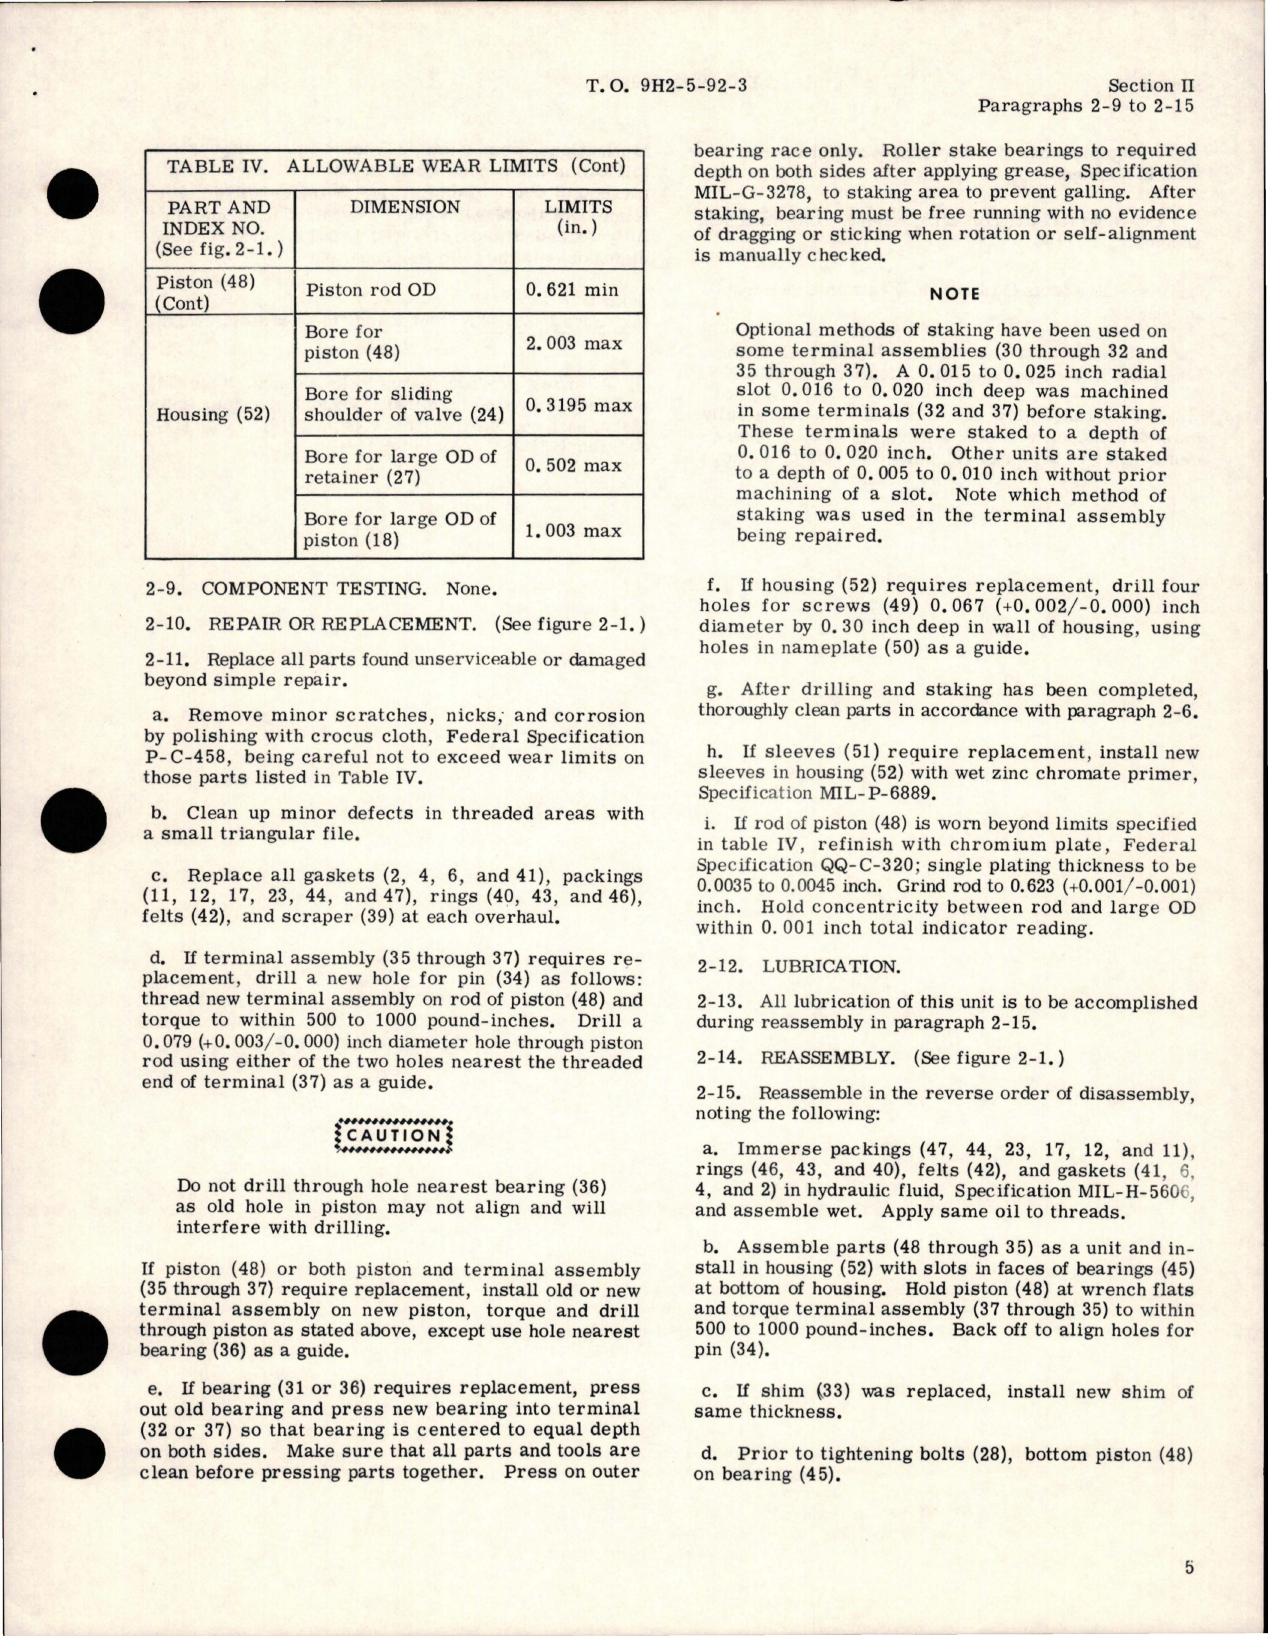 Sample page 7 from AirCorps Library document: Overhaul Instructions for Rudder Snubber Assembly - Part 5-98347-2, 5-98347-3, and 5-98347-4 